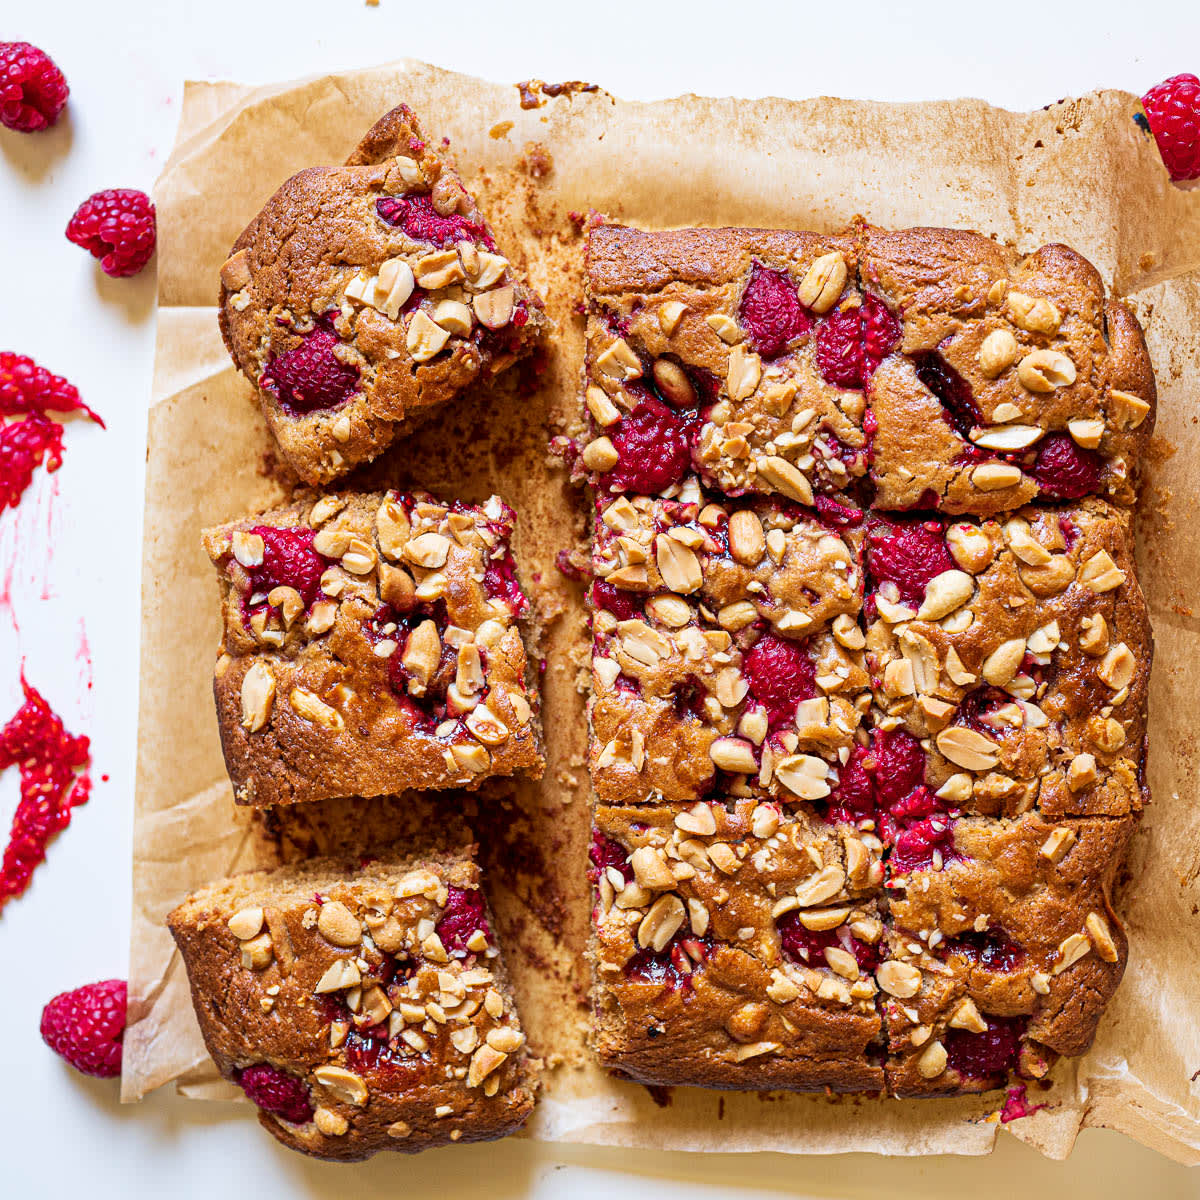 The BEST Peanut Butter and Jelly Blondies with Raspberries